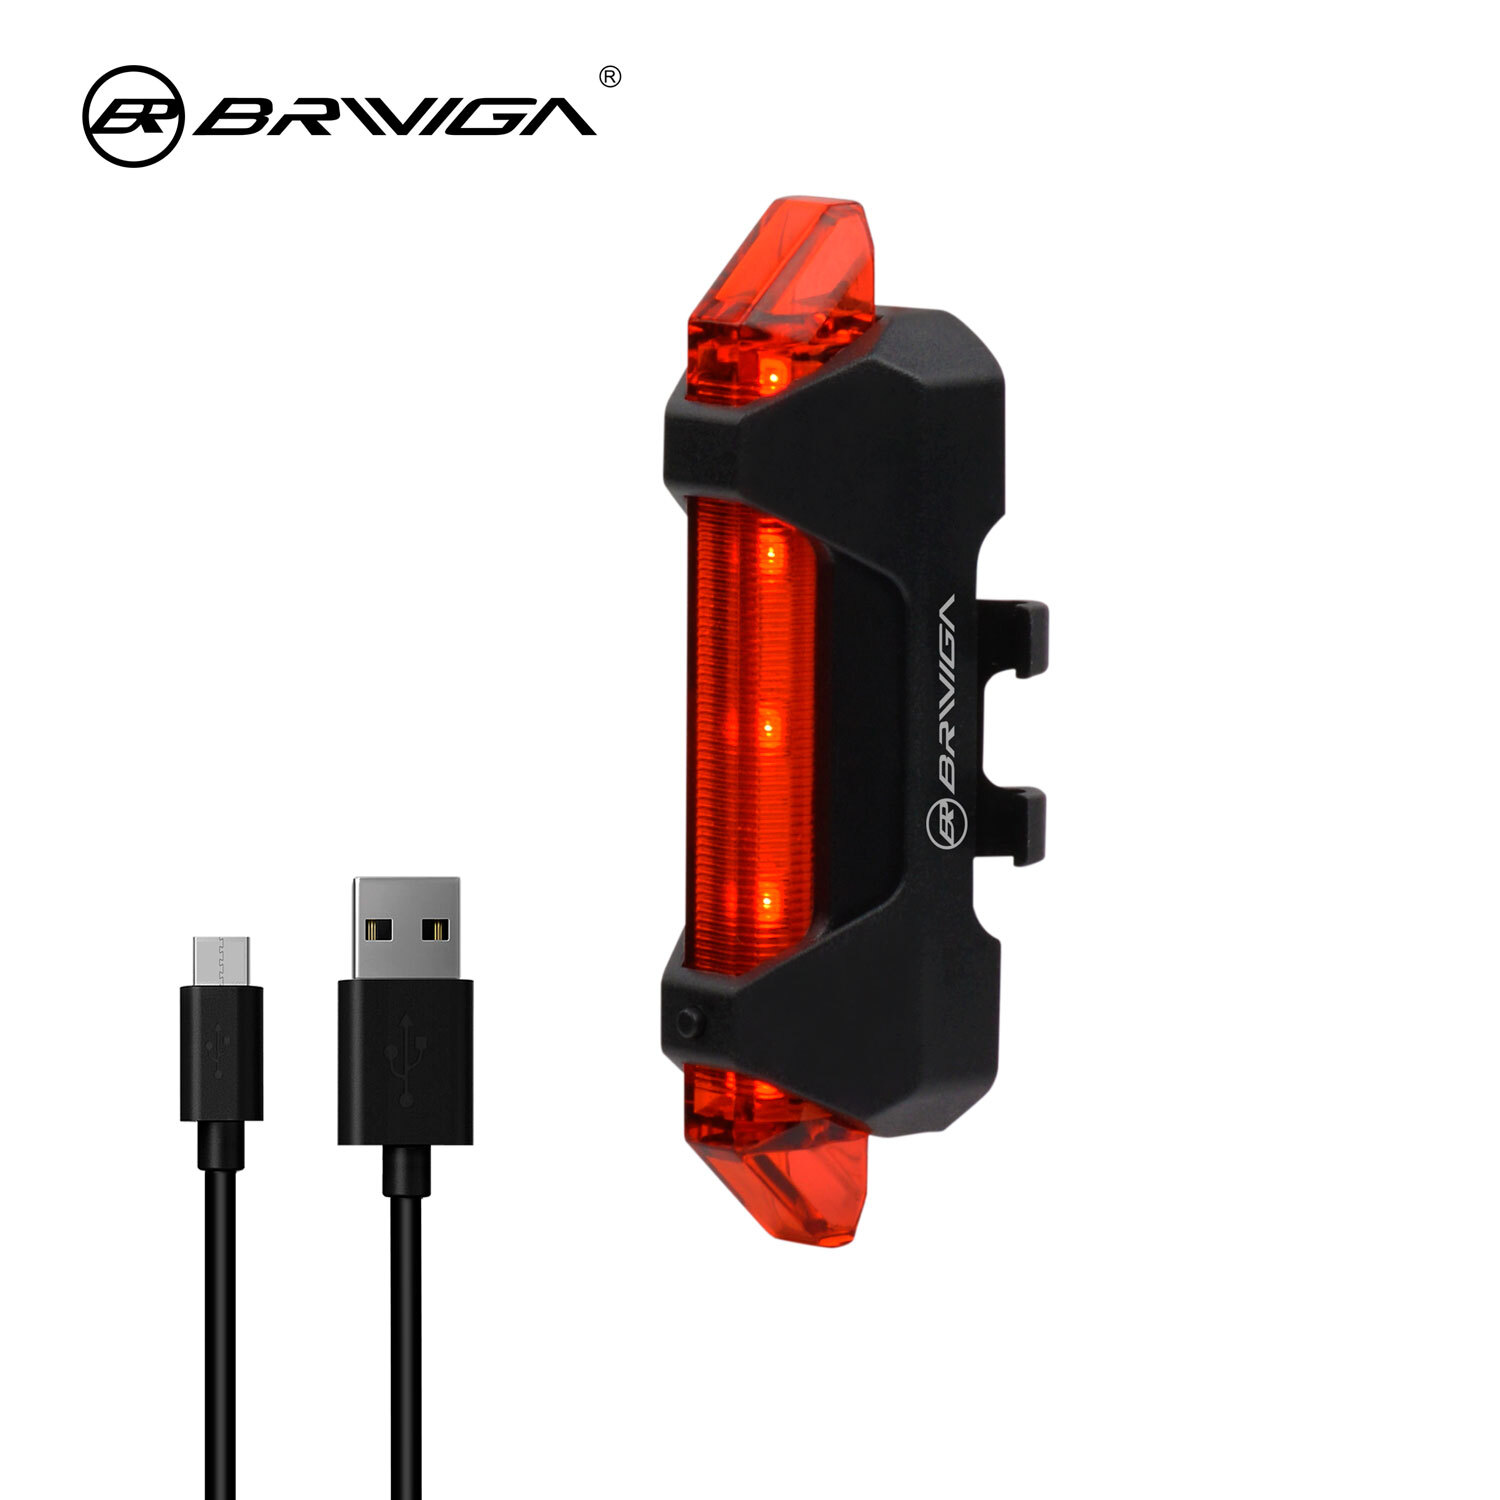 Bicycle RearLight USB Rechargeable 4 Different Flash Modes Waterproof Bicycle RearLight USB Rechargeable 4 Different Flash Modes Waterproof